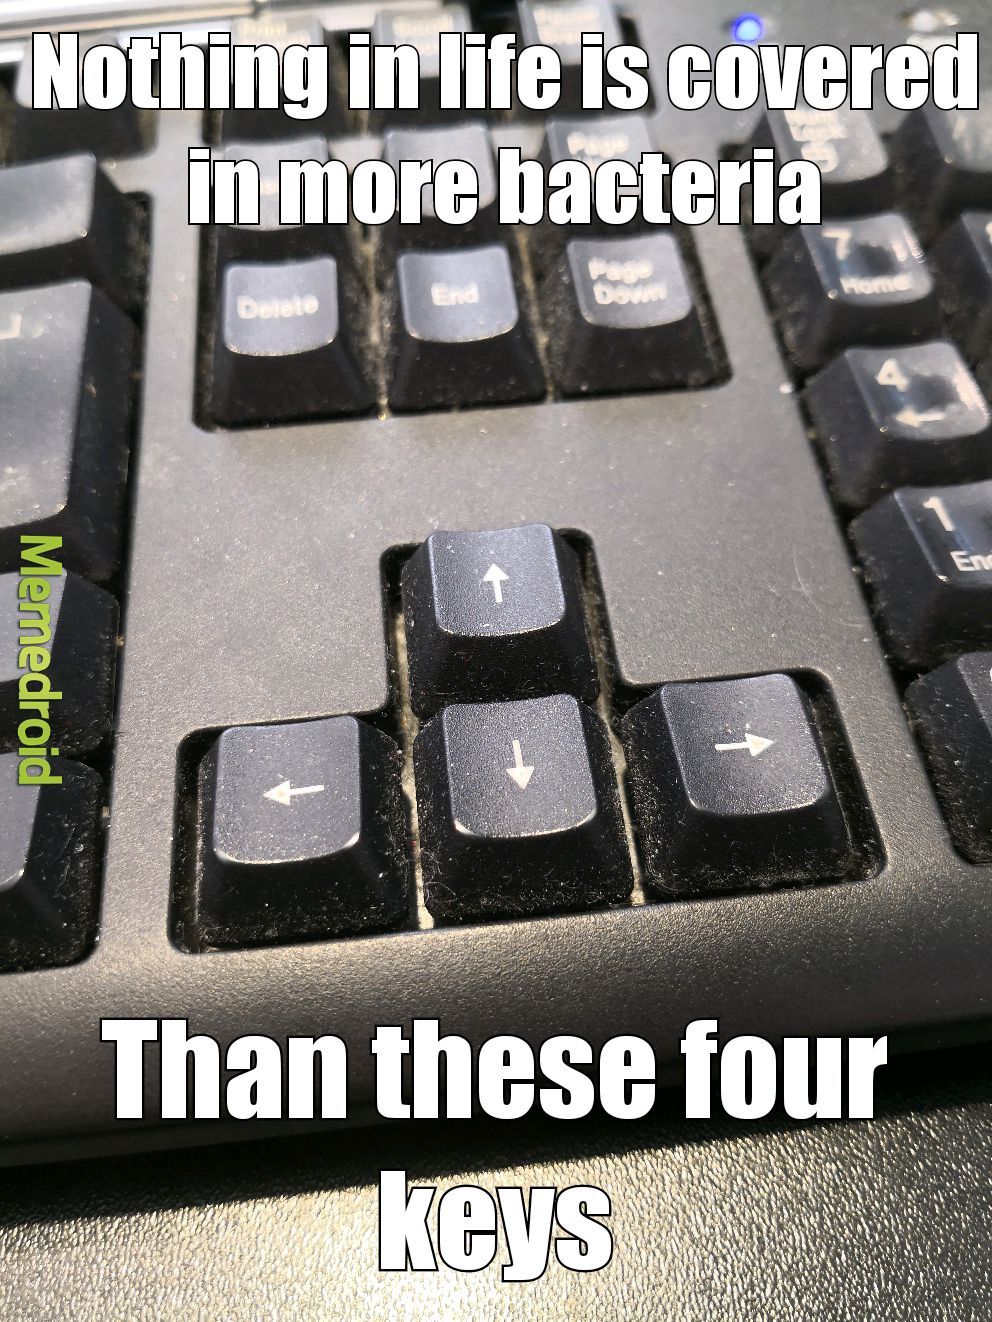 keyboard,Dirty,Stanton93,meme,memes,gifs,funny,pictures,pics,gif,comic.